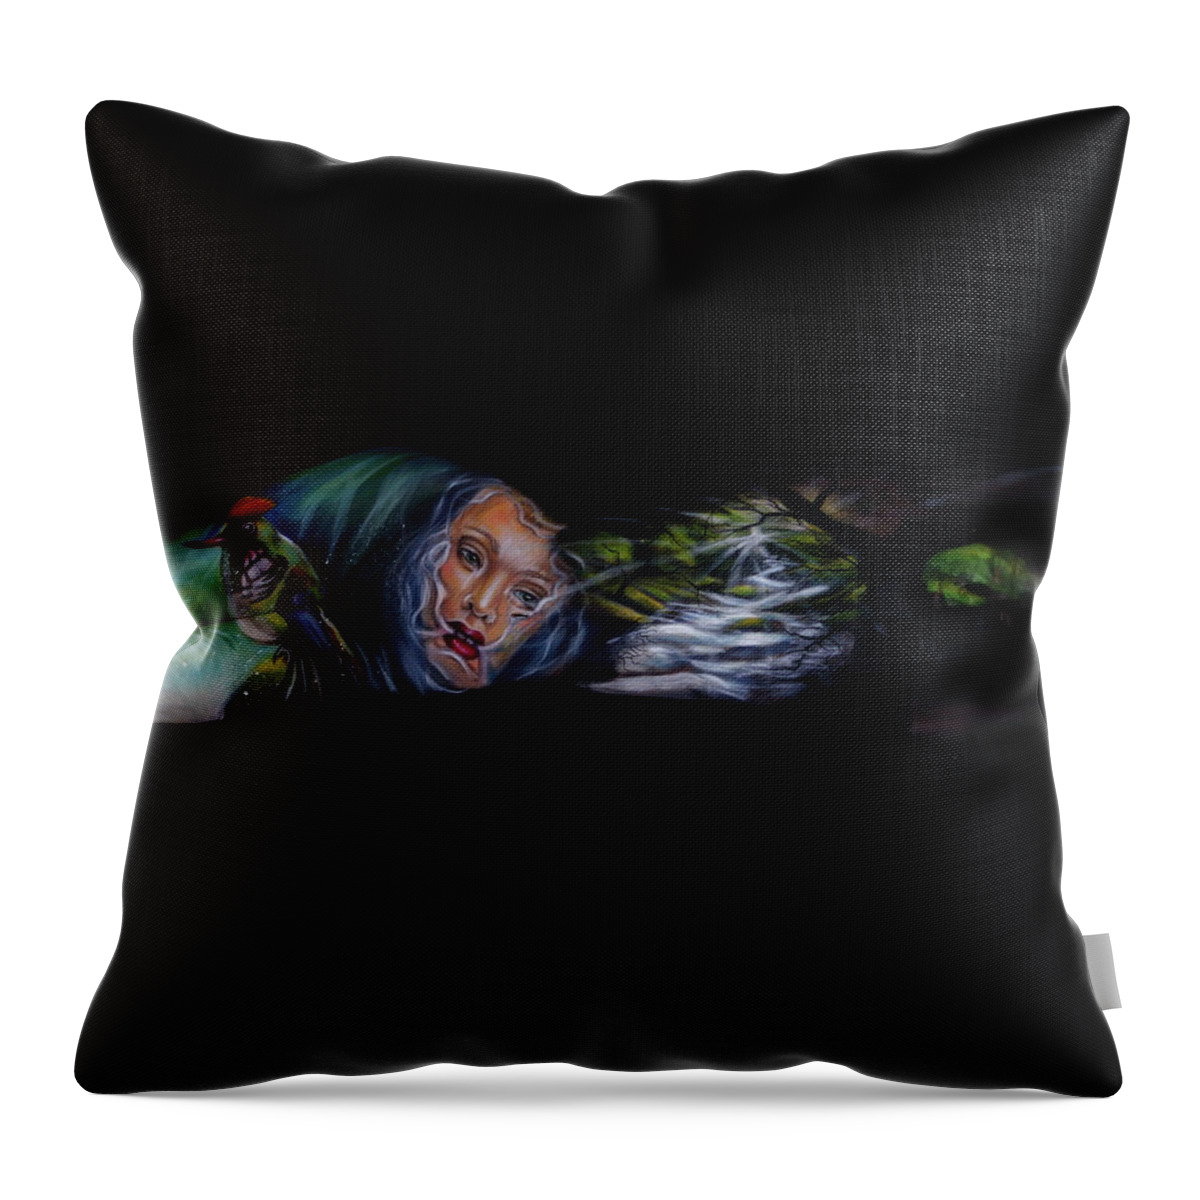 Bodypaint Throw Pillow featuring the photograph Finally Above Water by Angela Rene Roberts and Cully Firmin